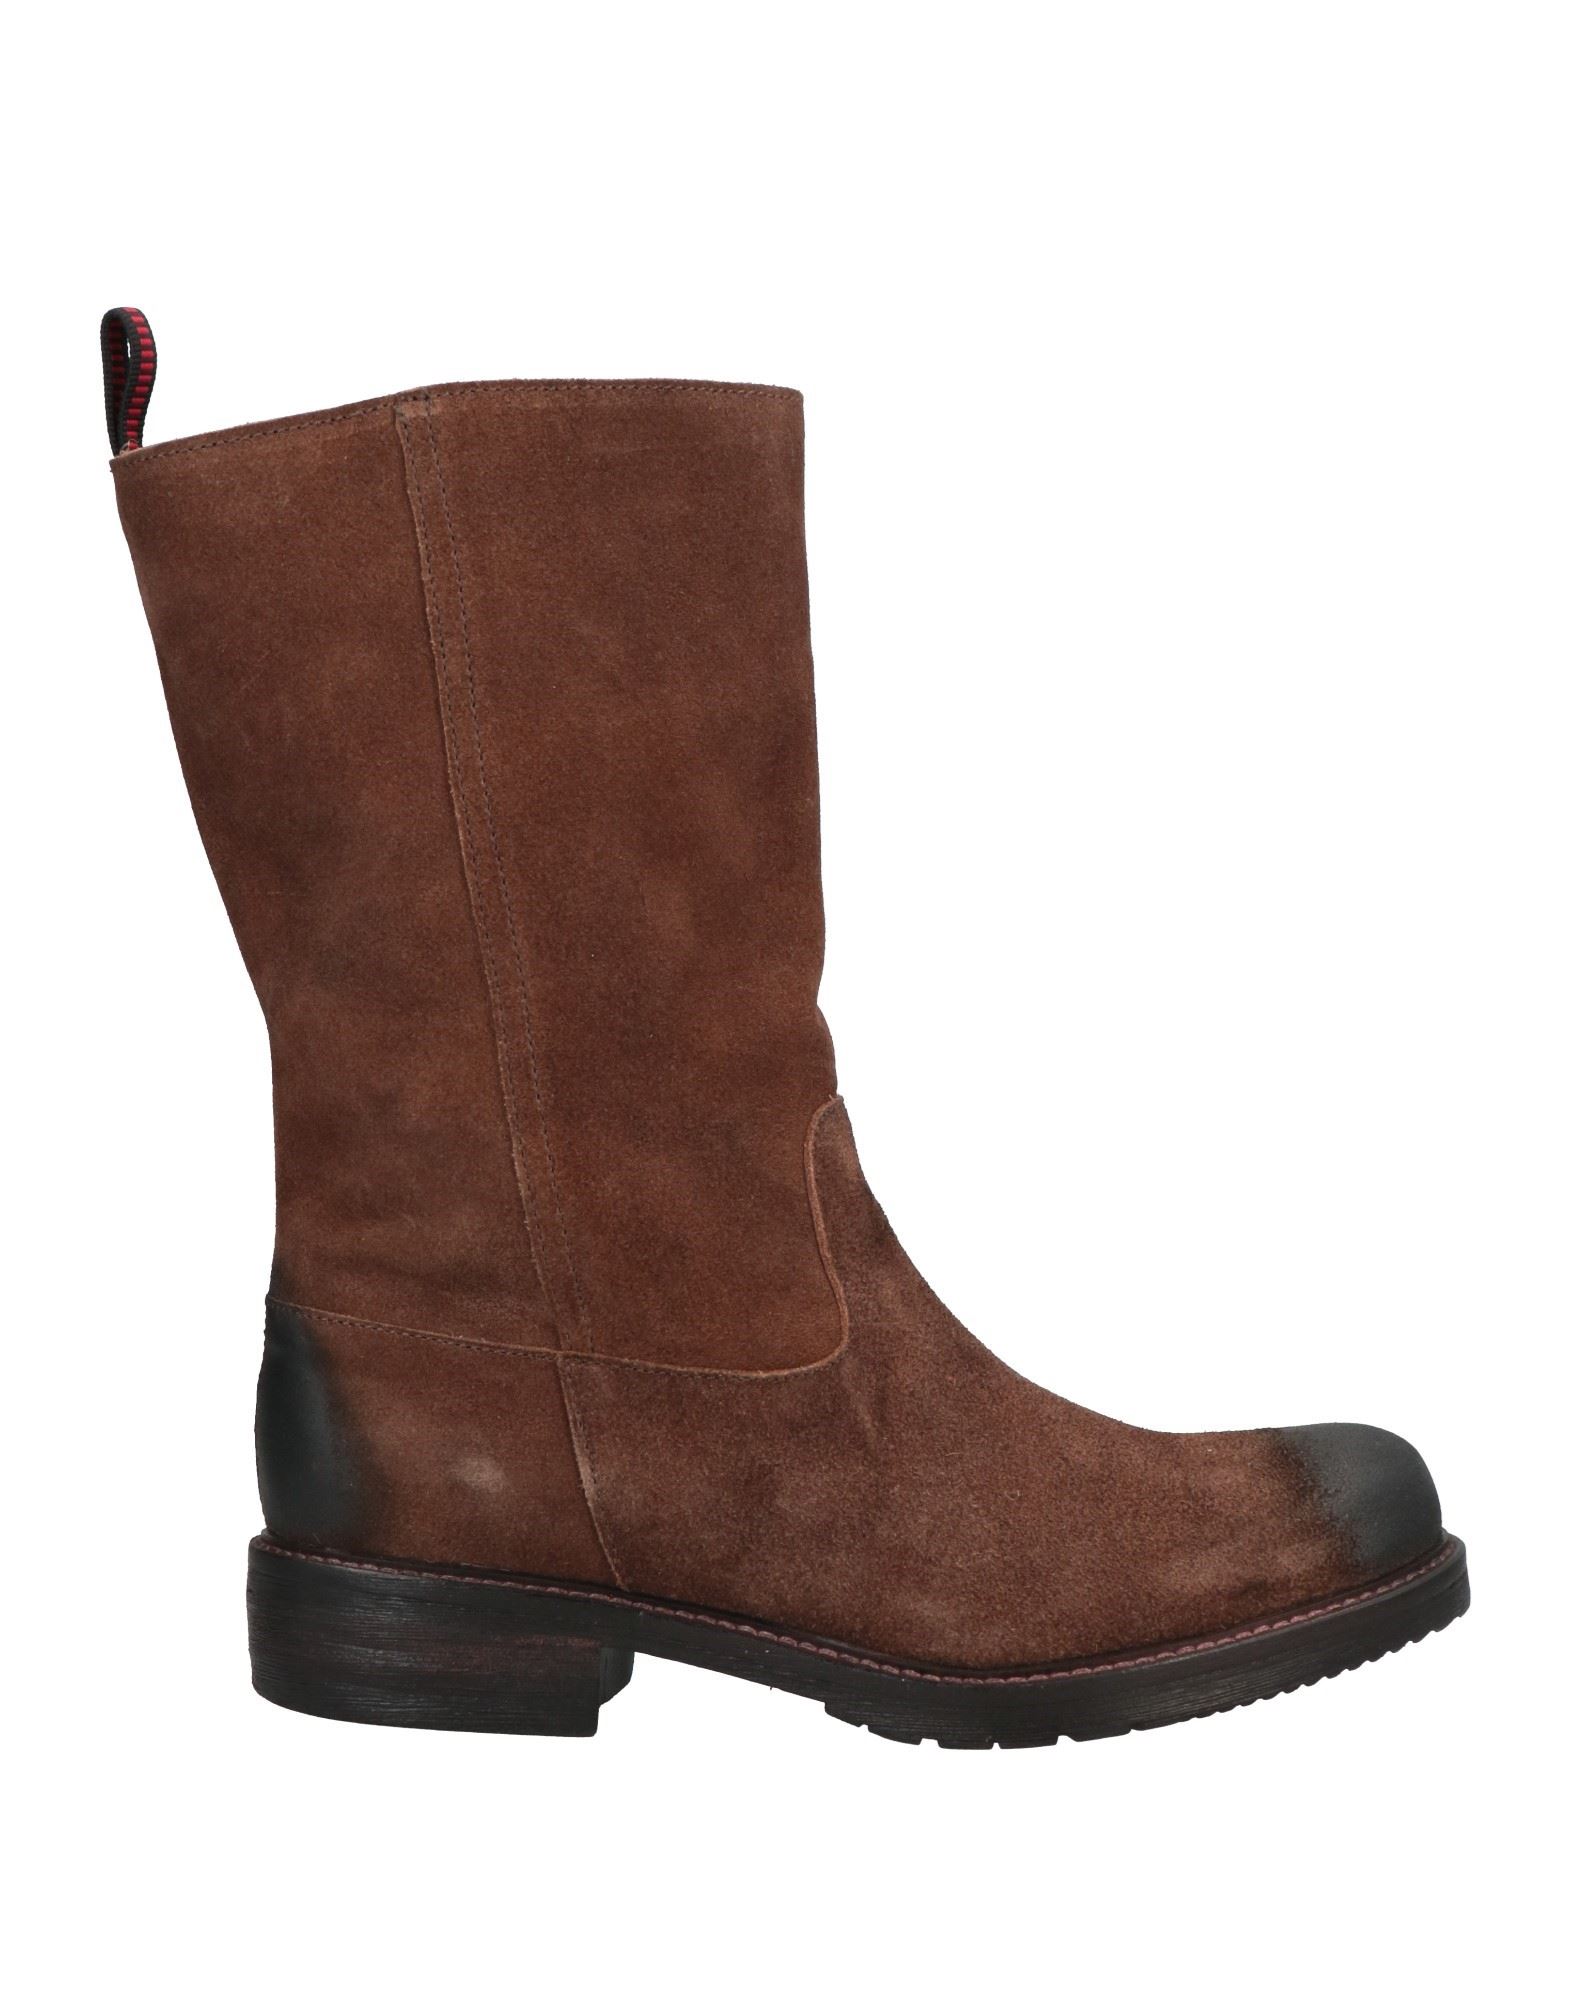 Jp/david Ankle Boots In Brown